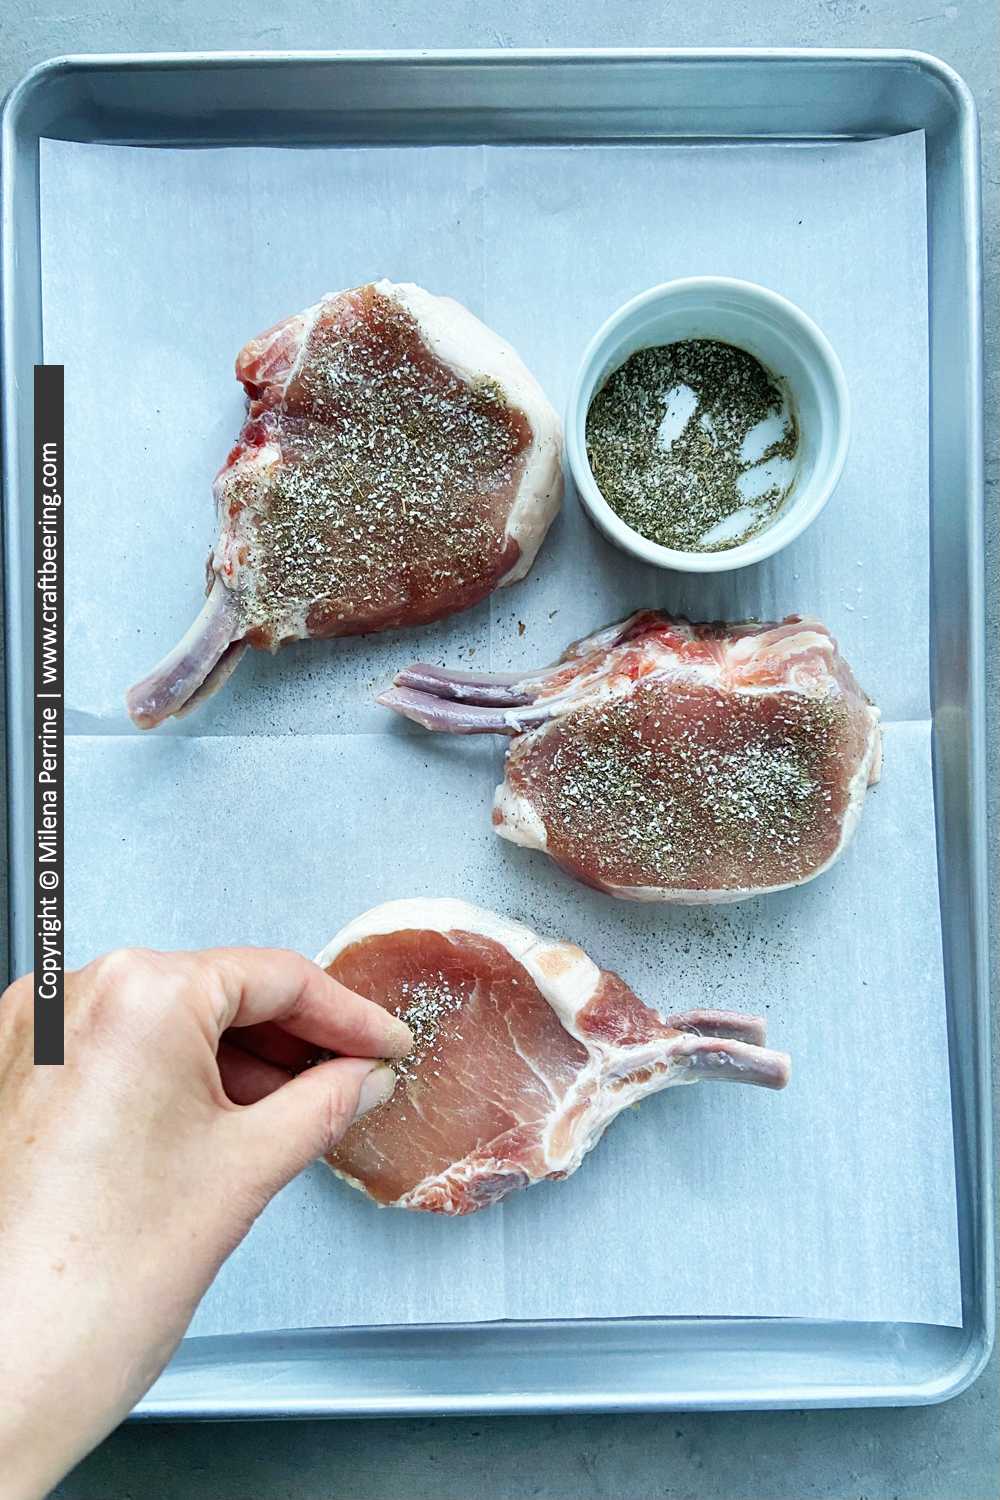 Season the brined pork chops with very little salt or none at all.